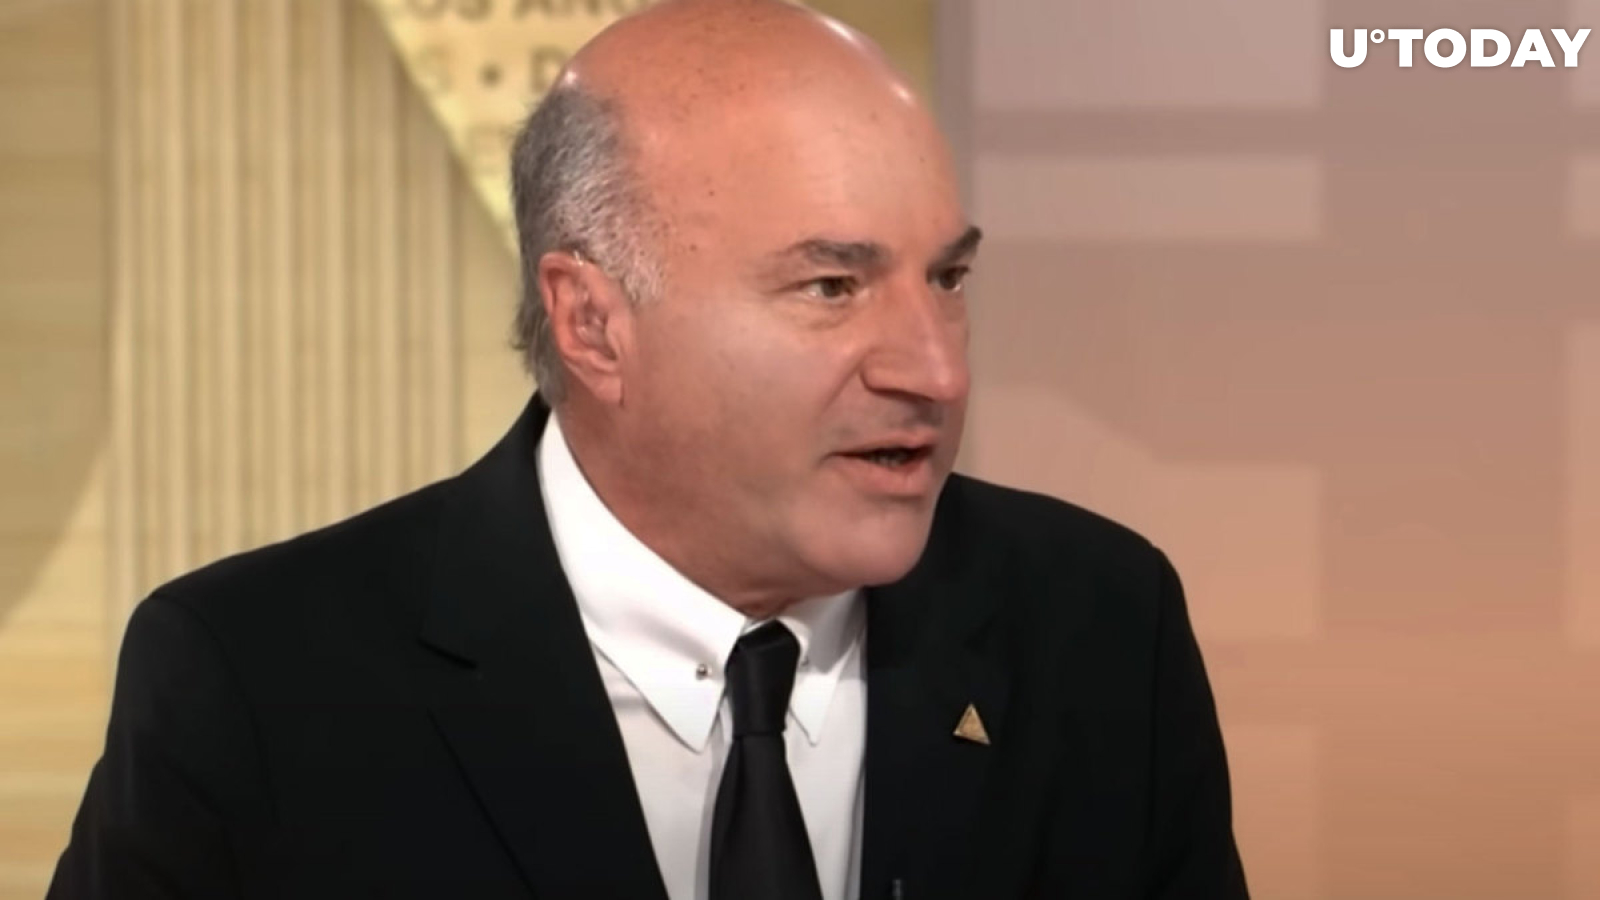 Pro-Ripple Lawyer and CryptoLaw Founder Slams Pro-FTX Kevin O'Leary, Here's Why